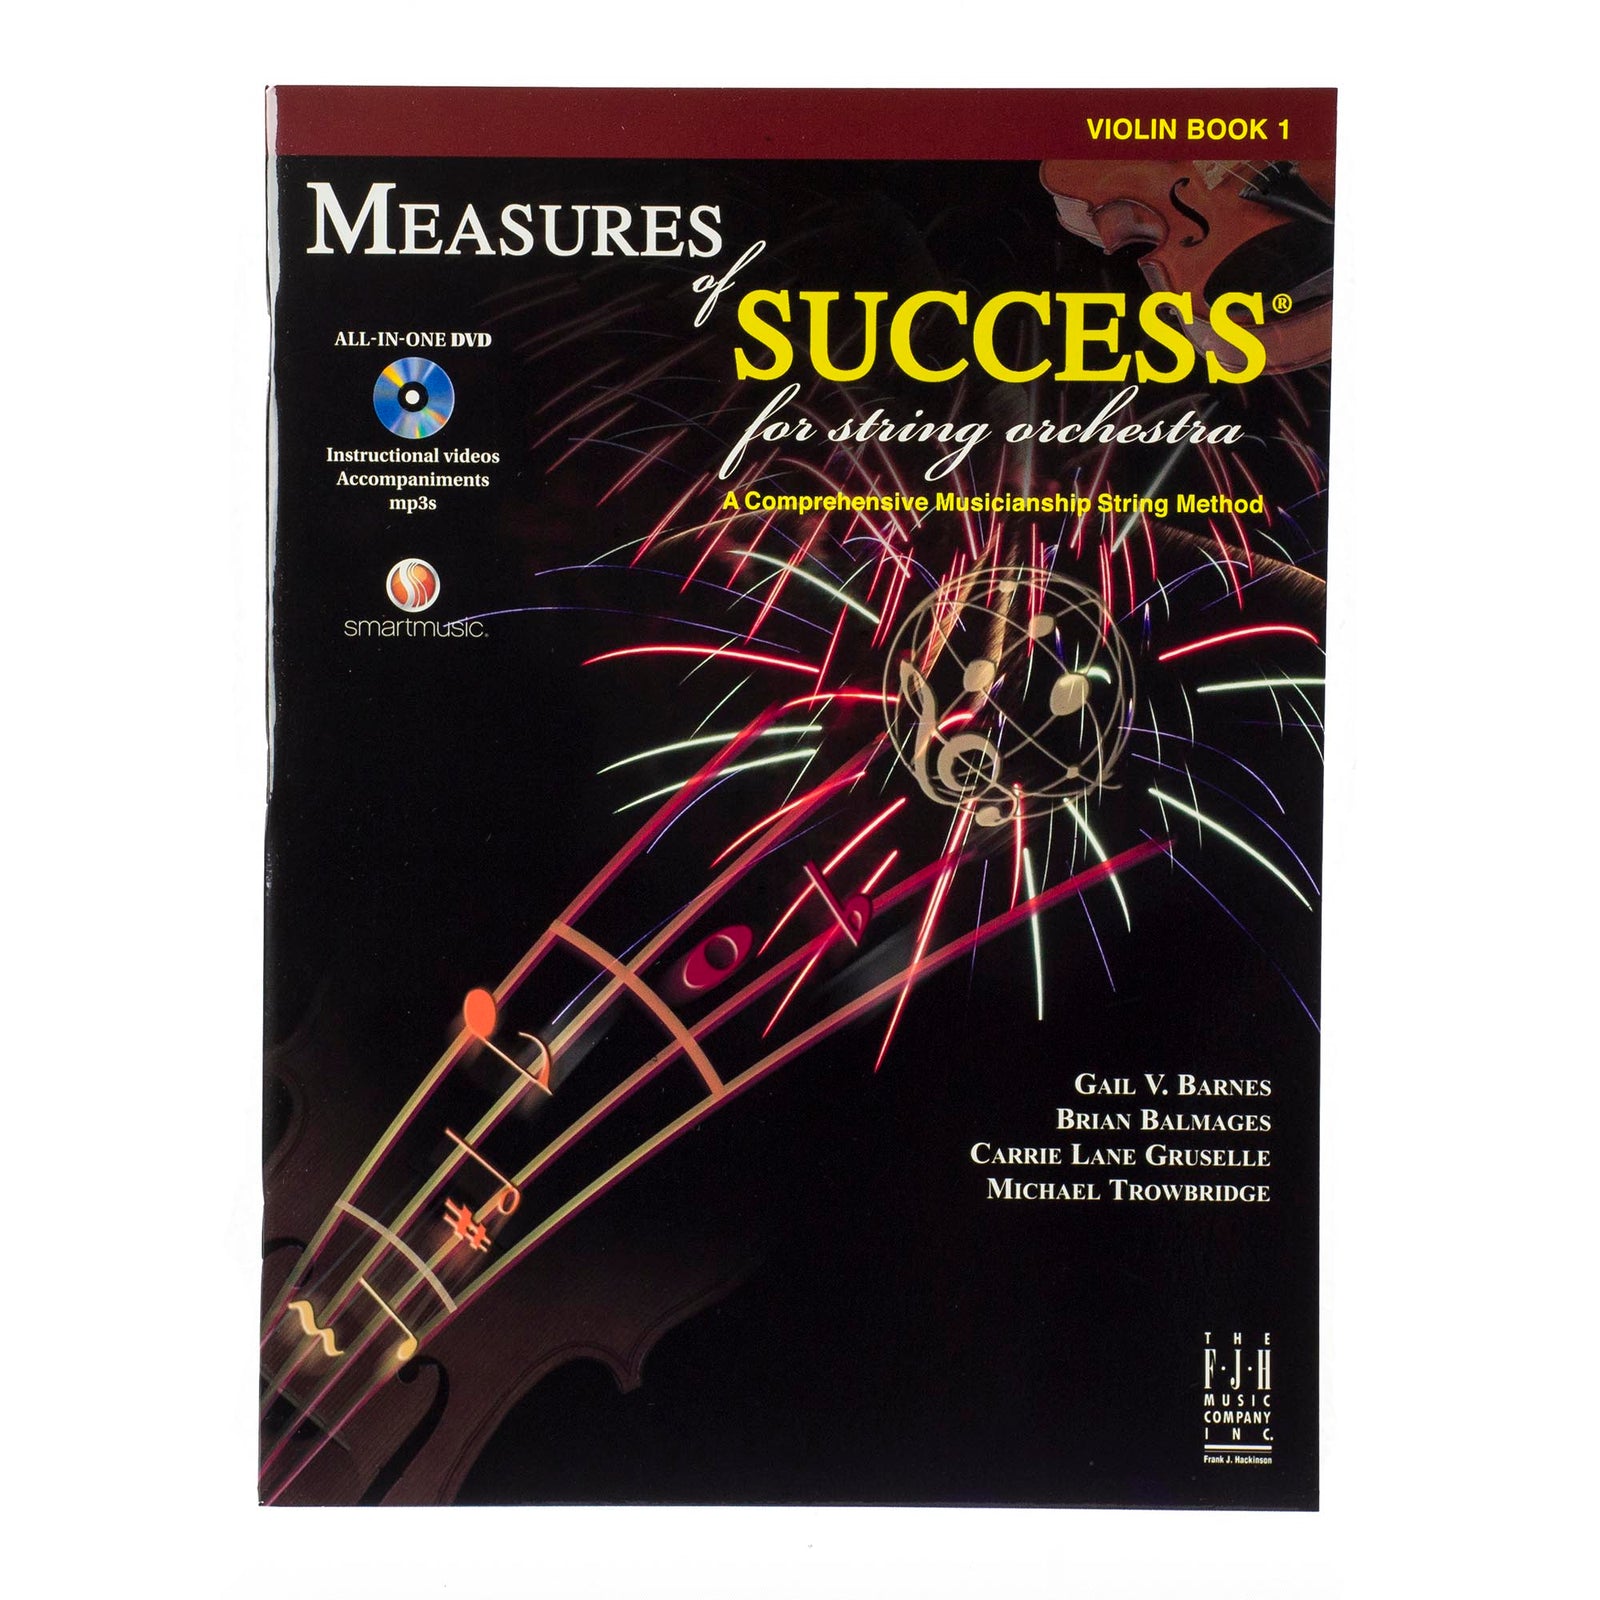 Measures Of Success For String Orchestra - Violin Book 1